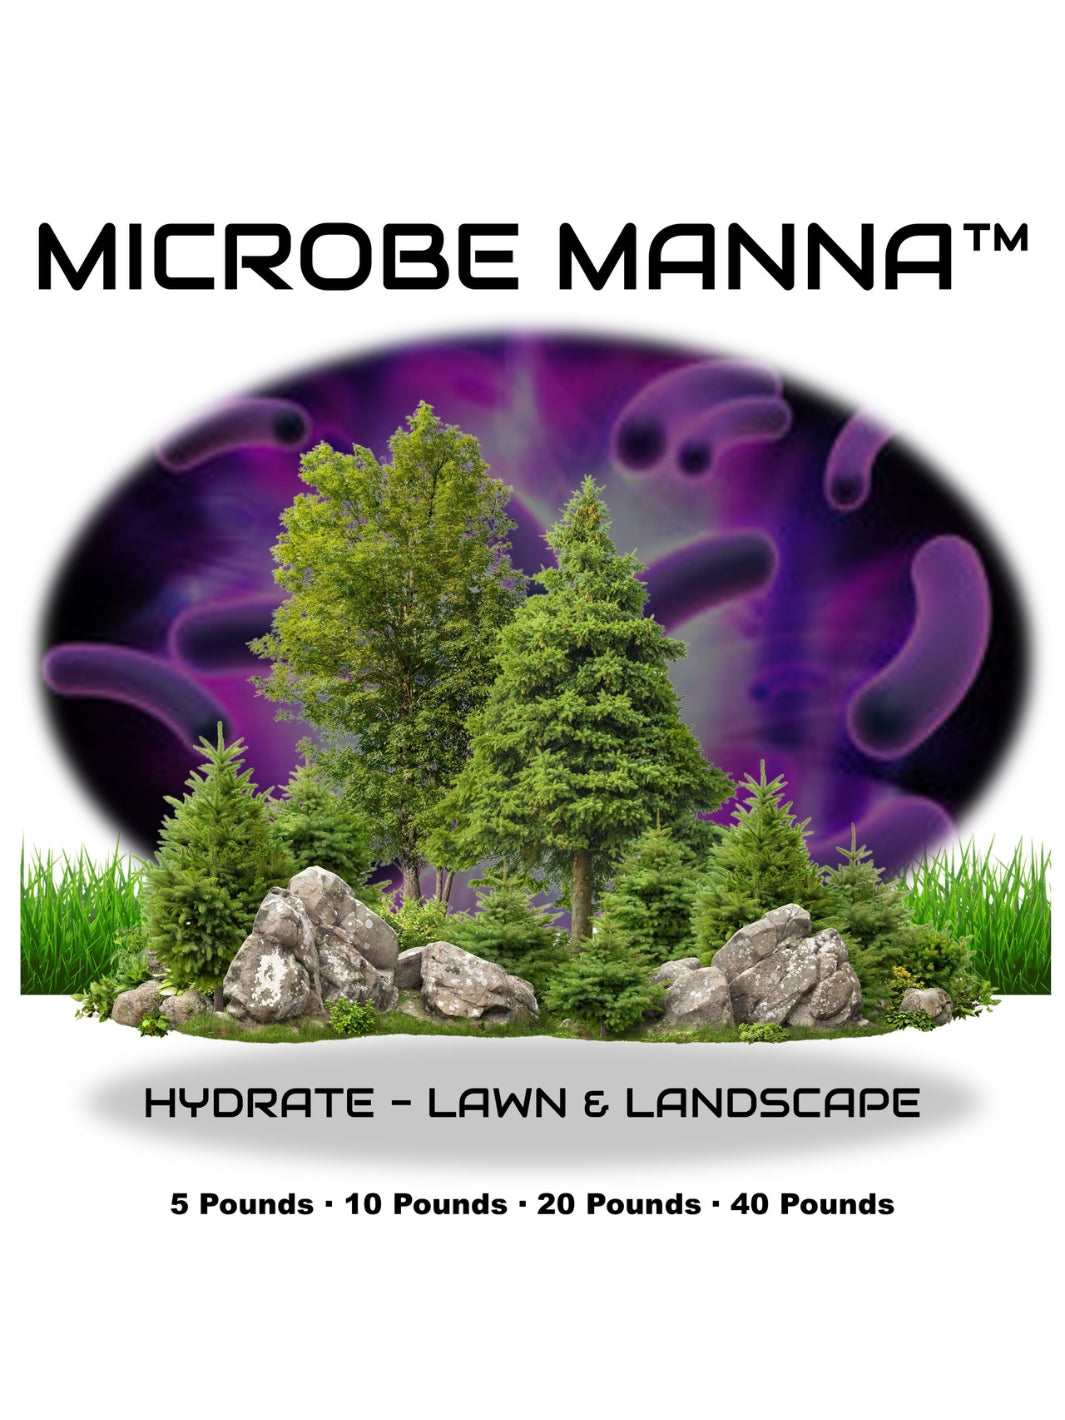 Microbe Manna Hydrate Lawn and Landscape Soil Nutrition Blend